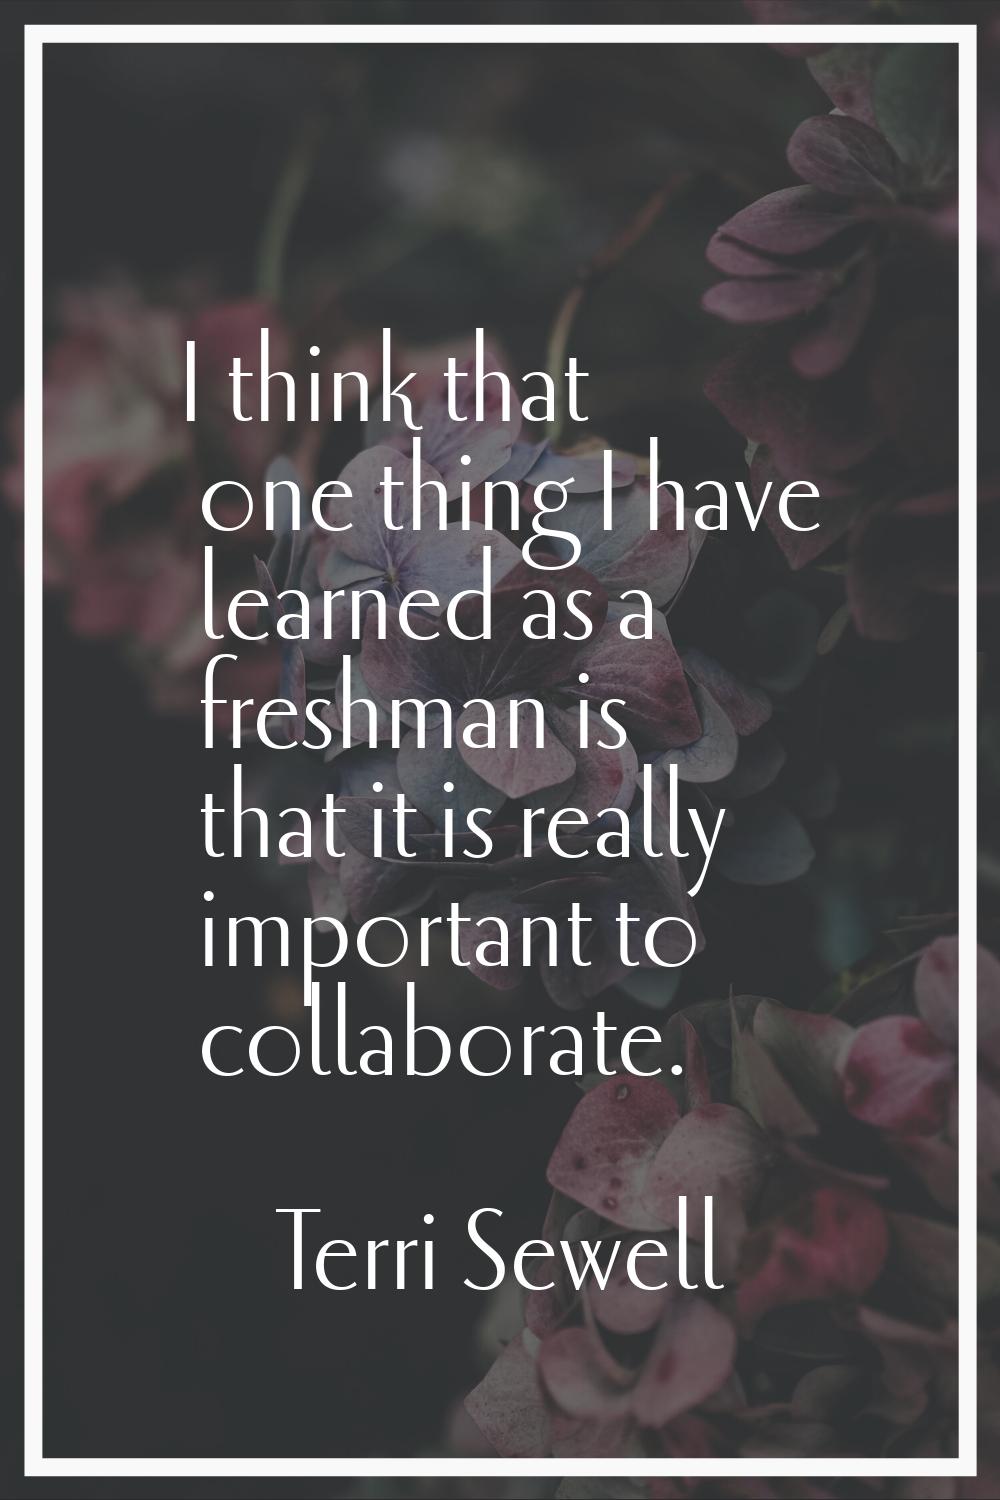 I think that one thing I have learned as a freshman is that it is really important to collaborate.